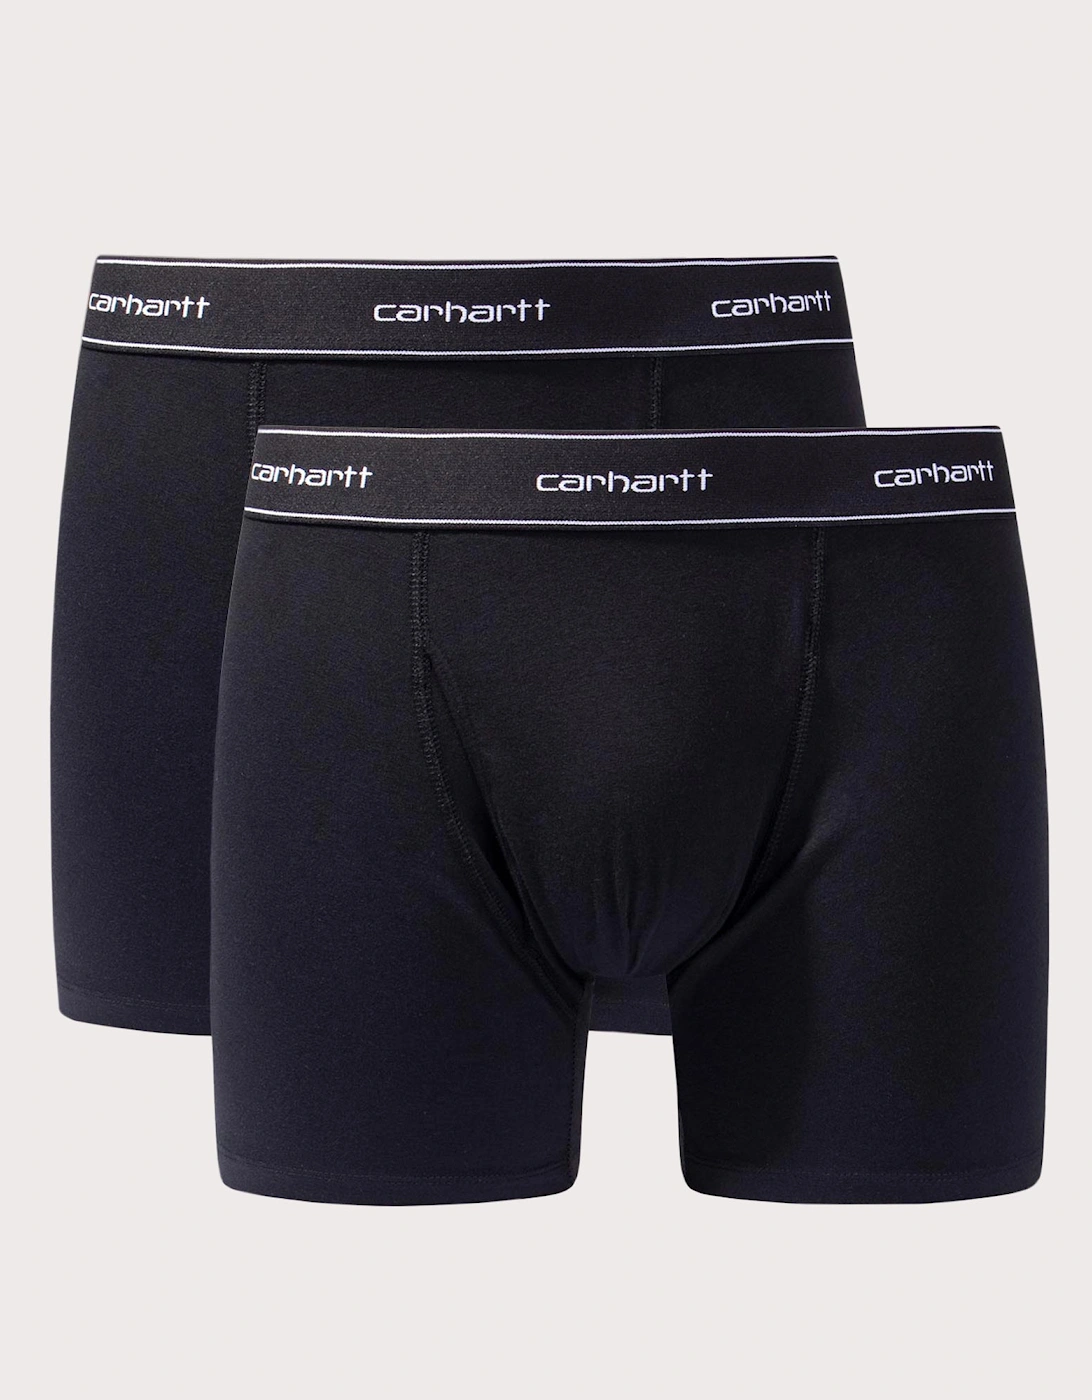 Two Pack Of Cotton Trunks